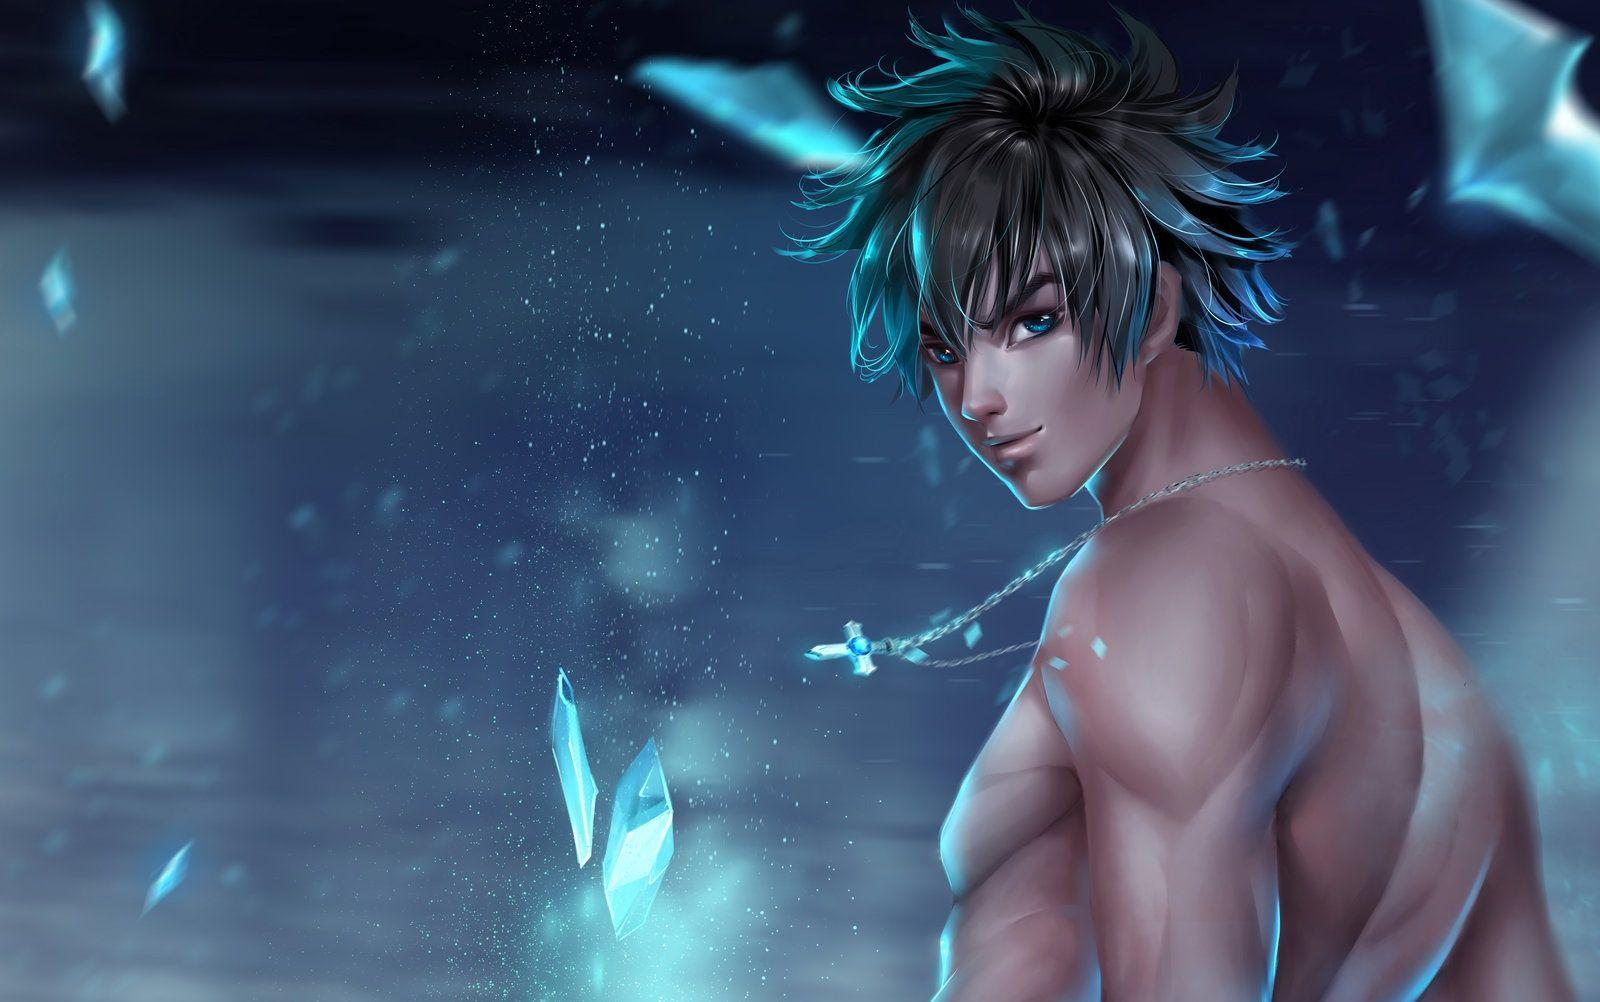 Gray Fullbuster 3D Picture and WallpaperDAP